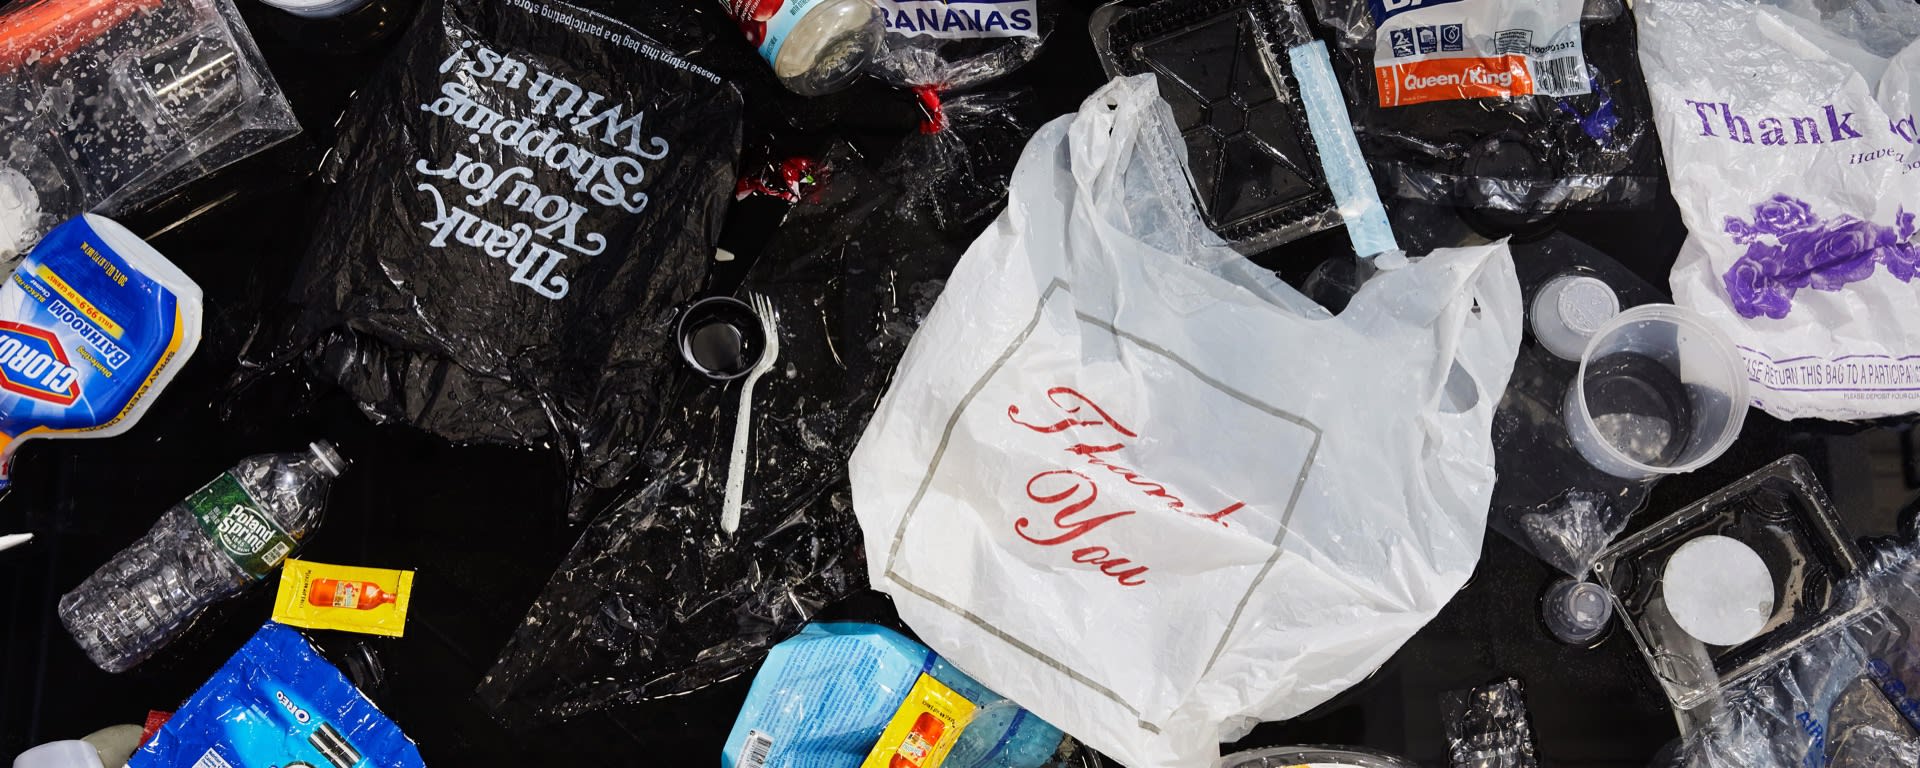 Top-down photograph of collection of about 50 pieces of the artist's single use plastic floating in a small black pool. Most prominently featured are two plastic 'Thank You' shopping bags.